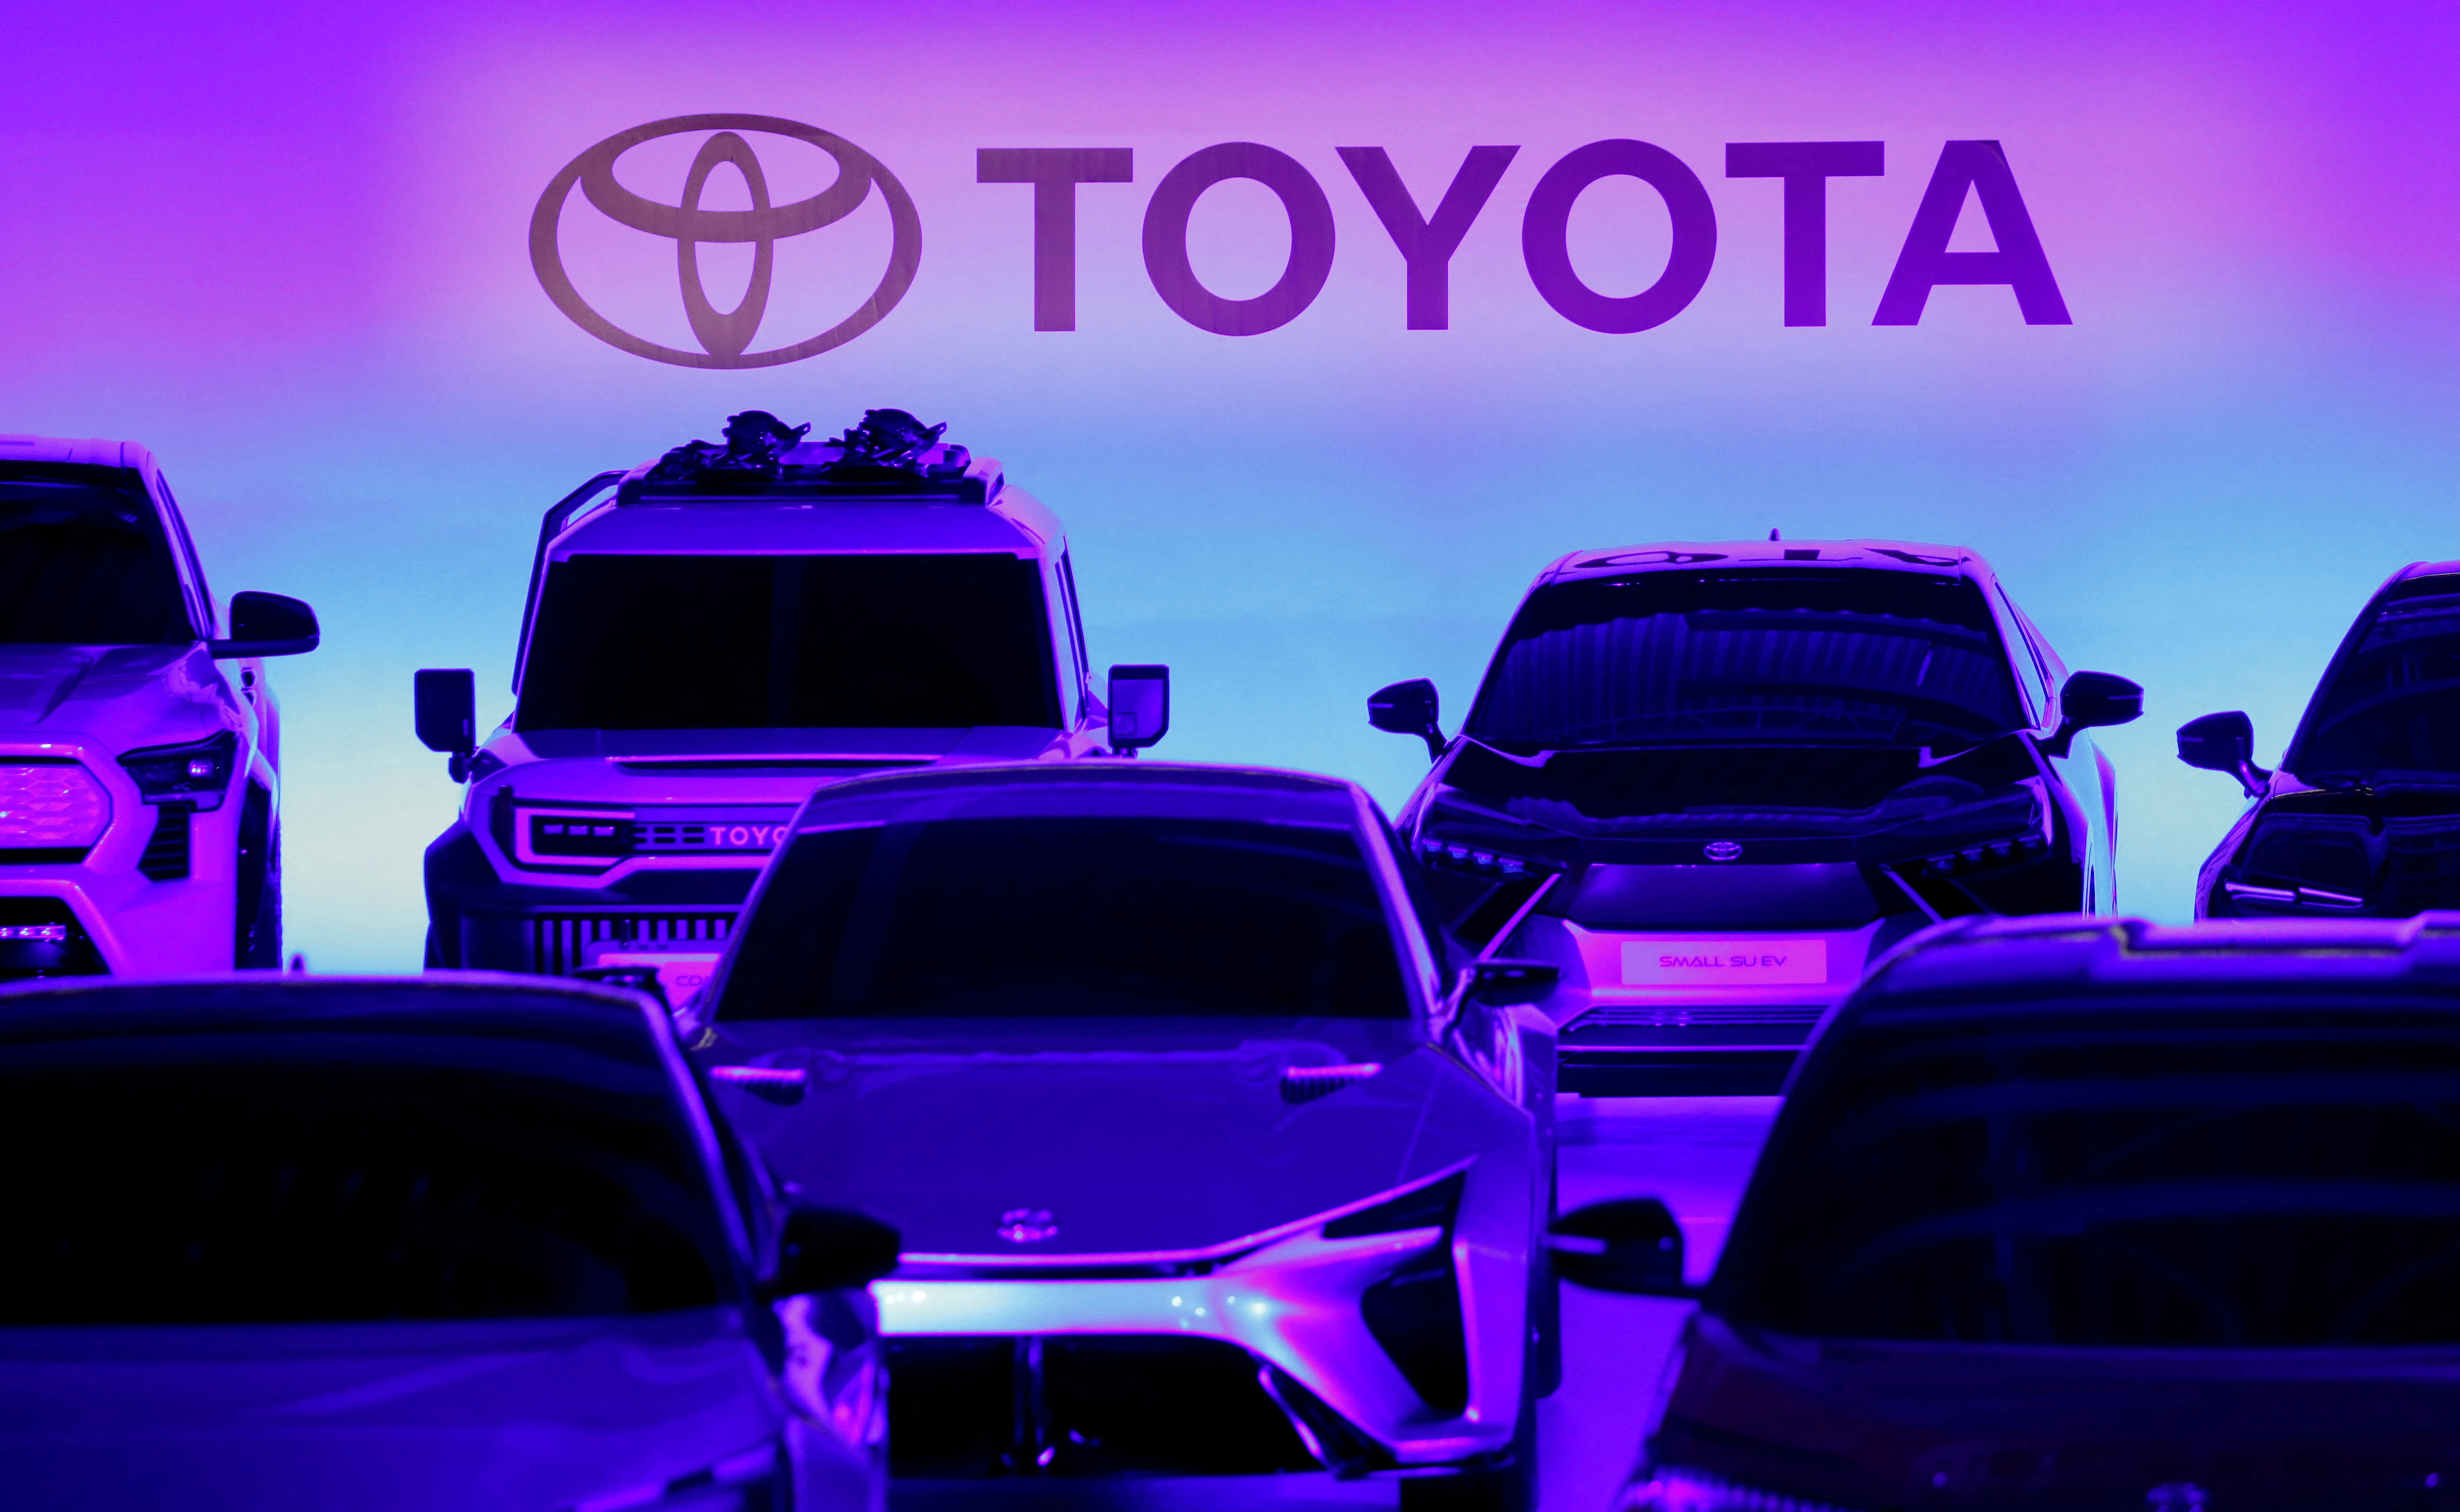 Toyota cars are seen at a briefing on the company's electric vehicle strategy